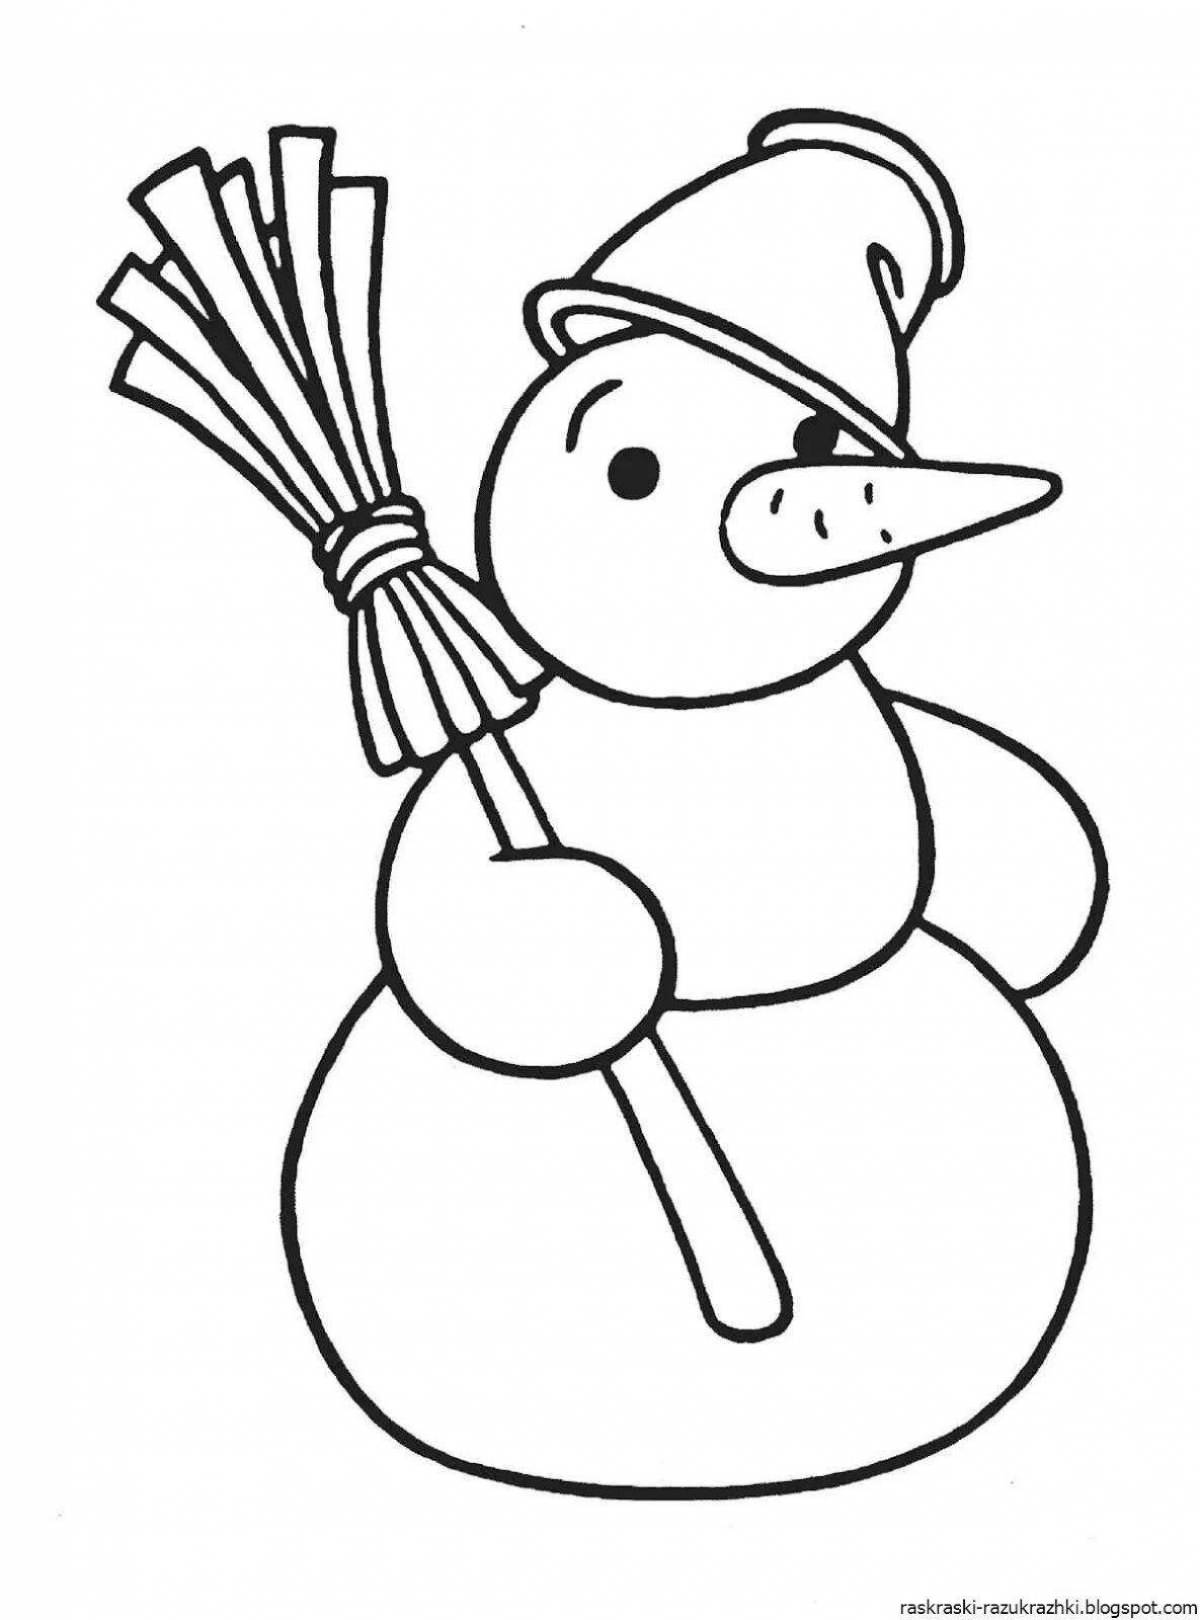 Adorable snowman coloring book for 5 year olds